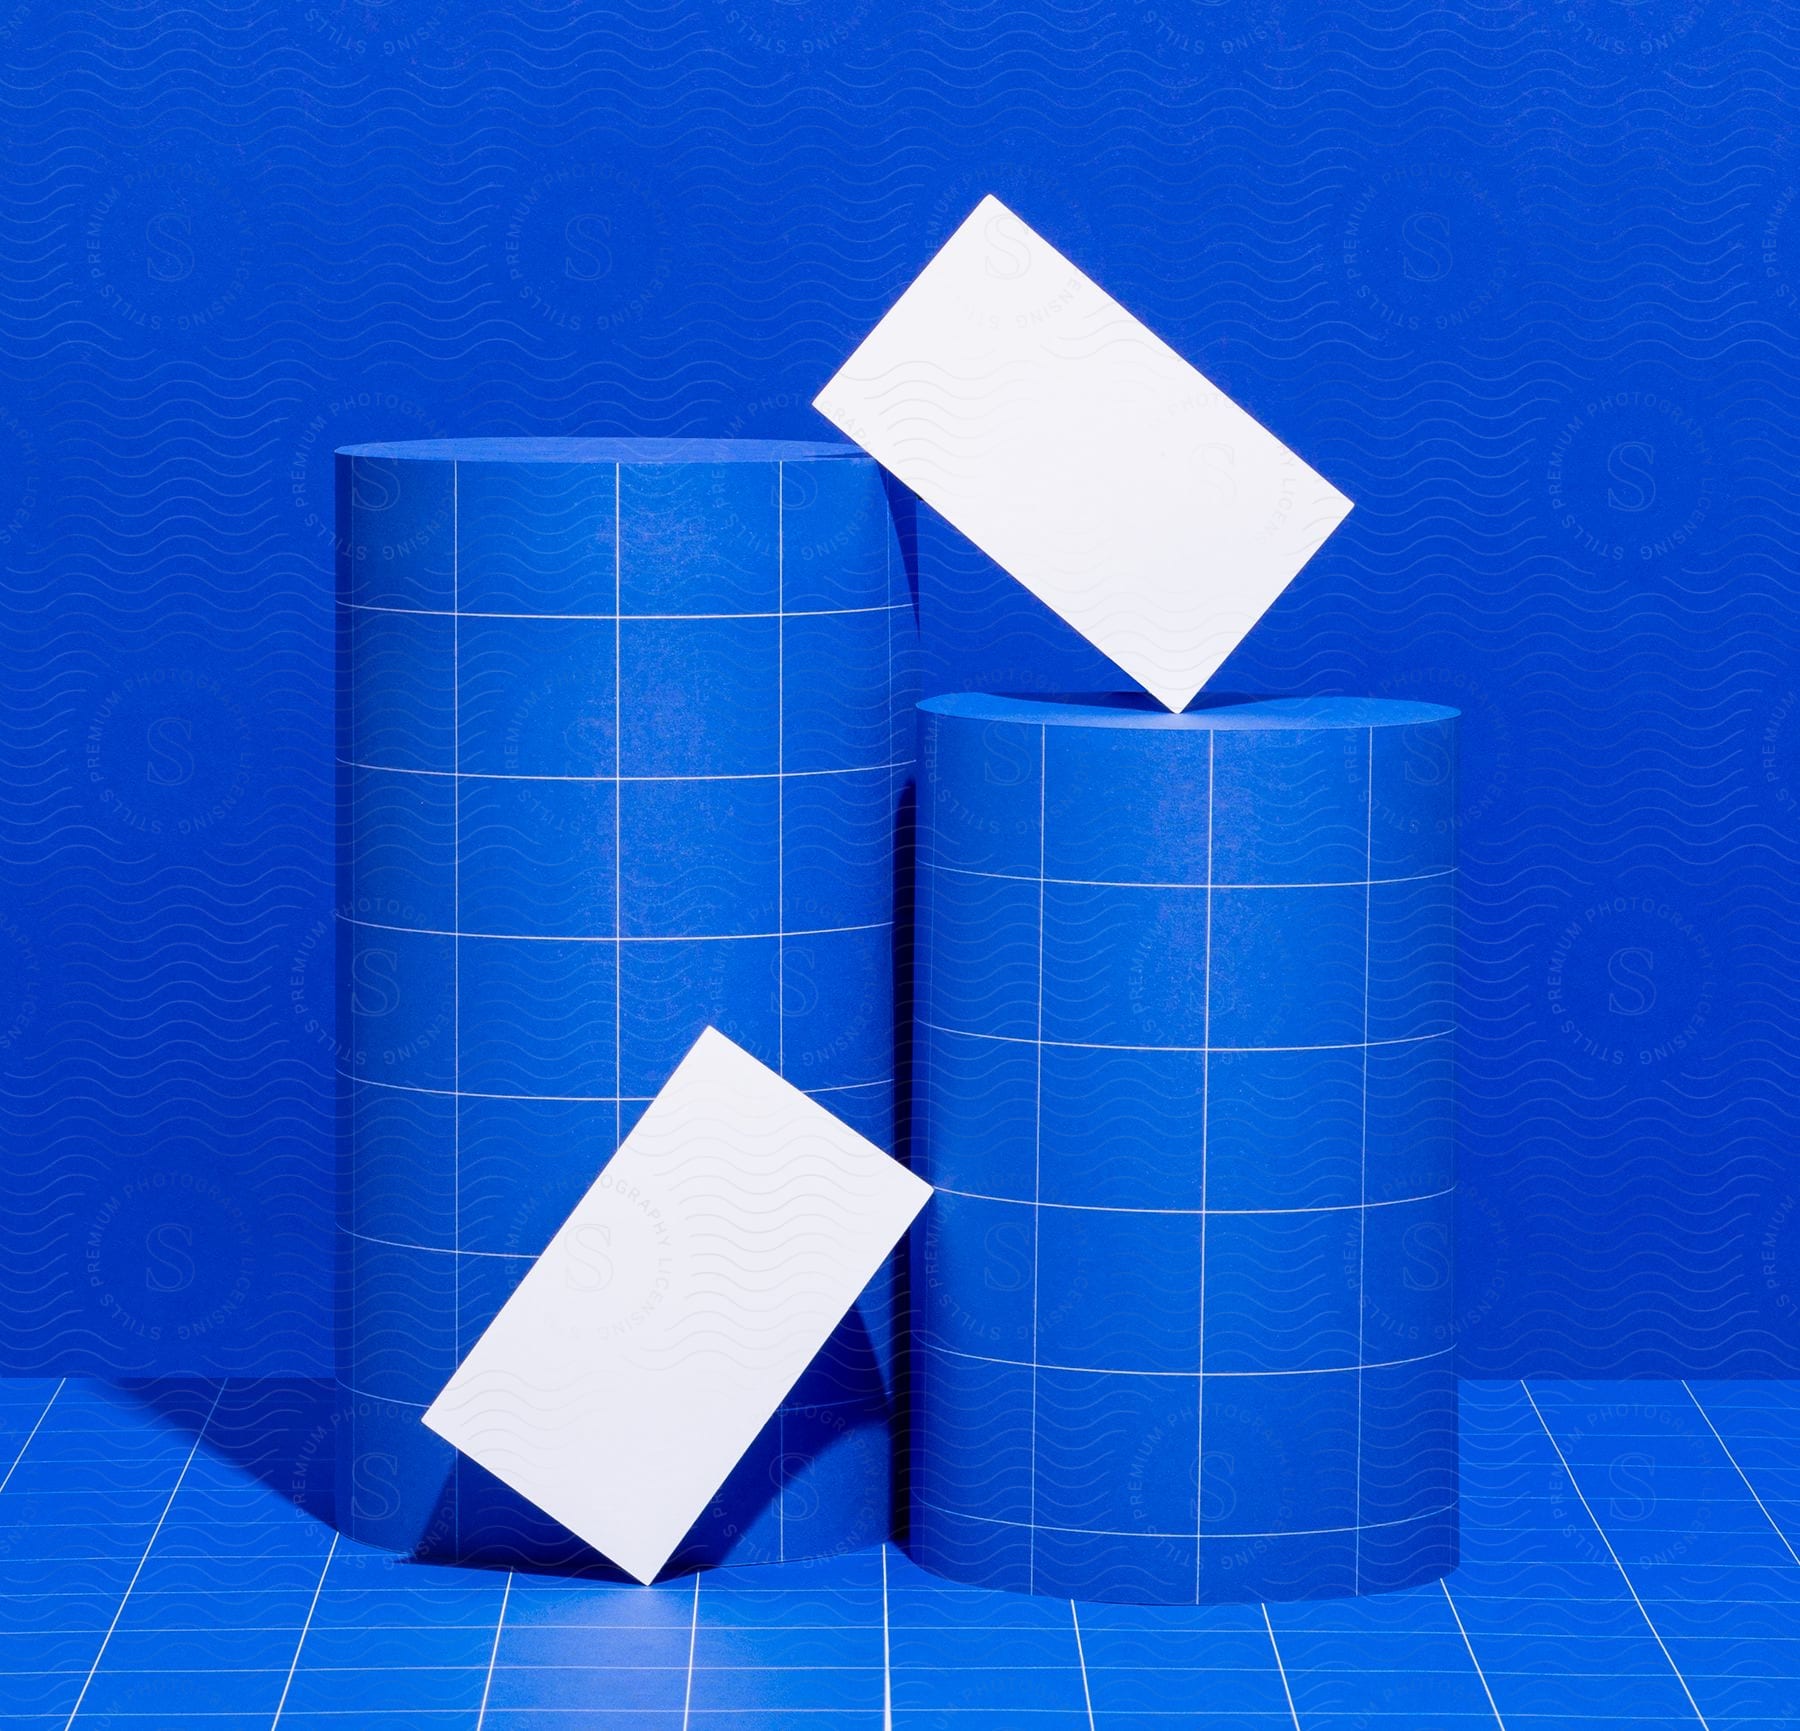 Two blue rolls with white squares on top, on a blue background with a white square, on a blue checkered table with white stripes.